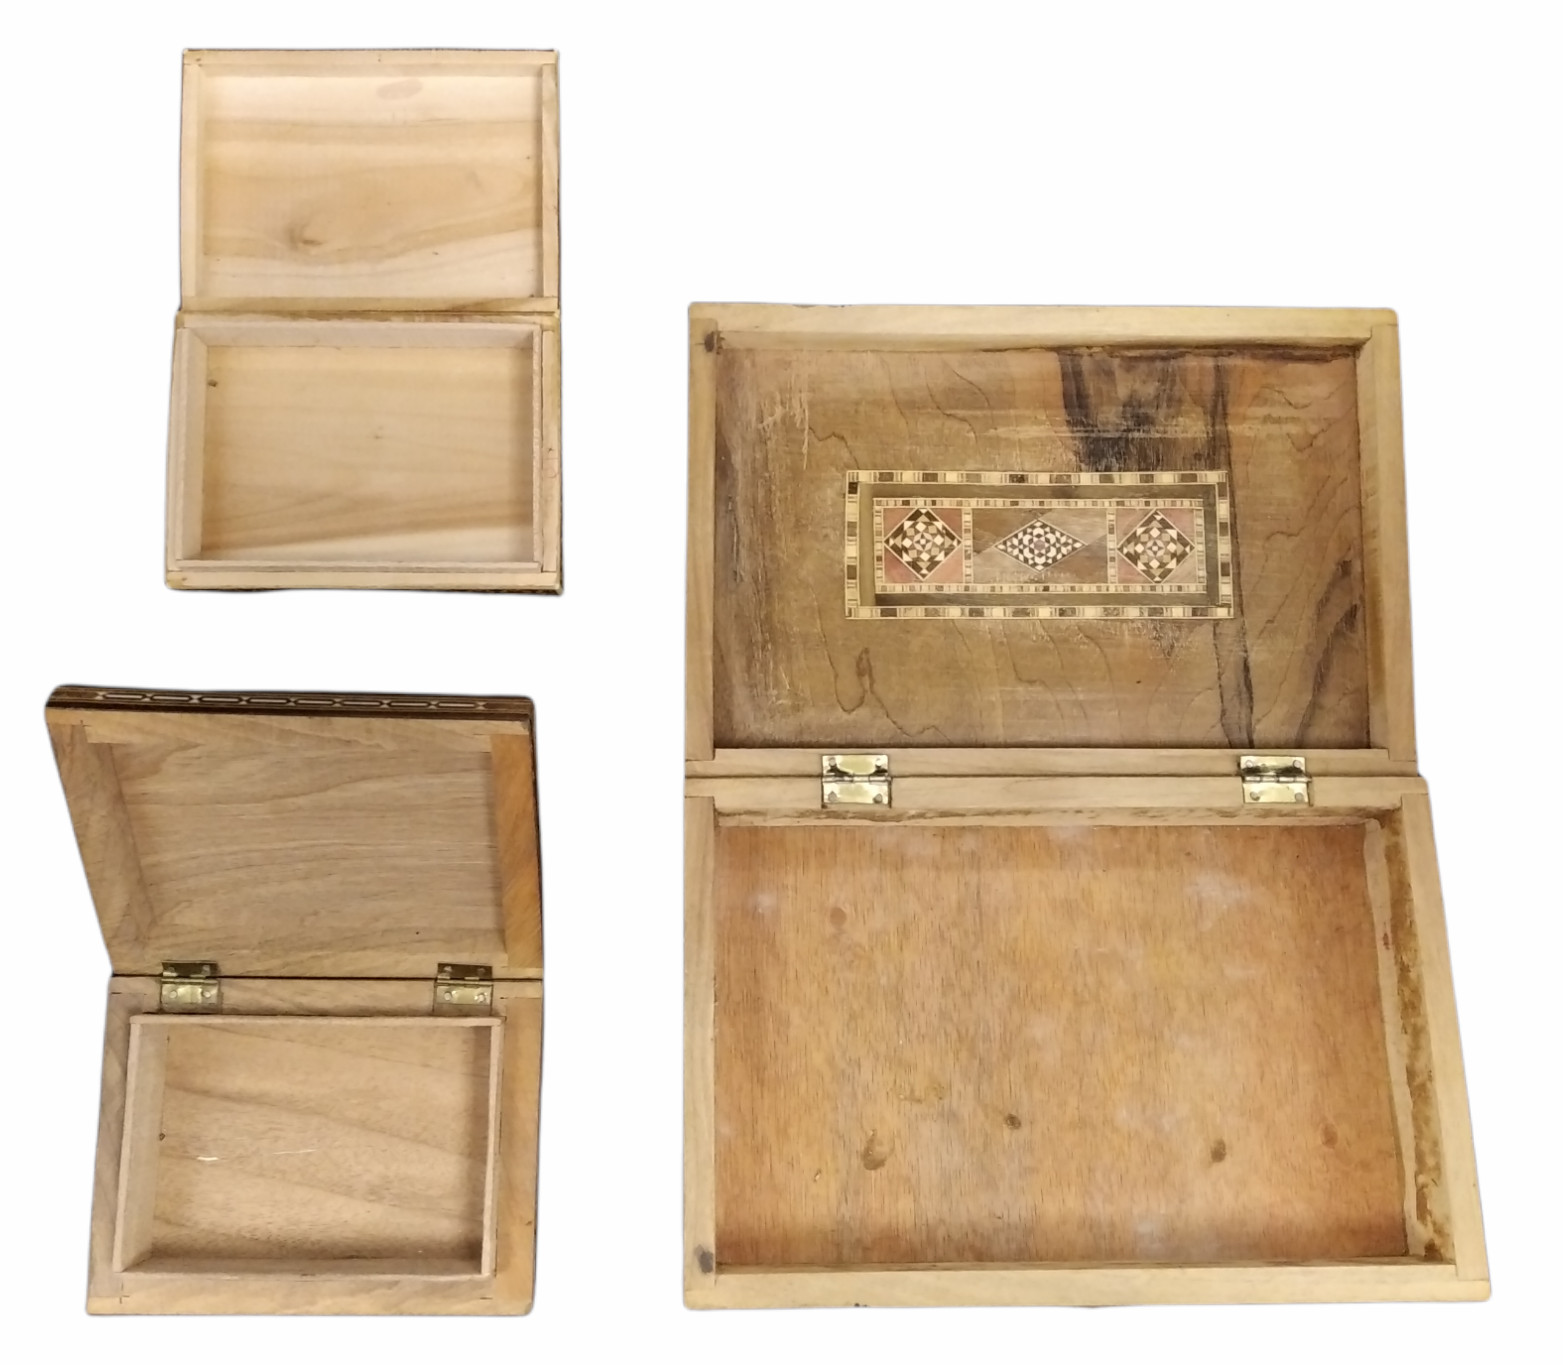 3 Wooden Syrian Boxes - Image 4 of 4